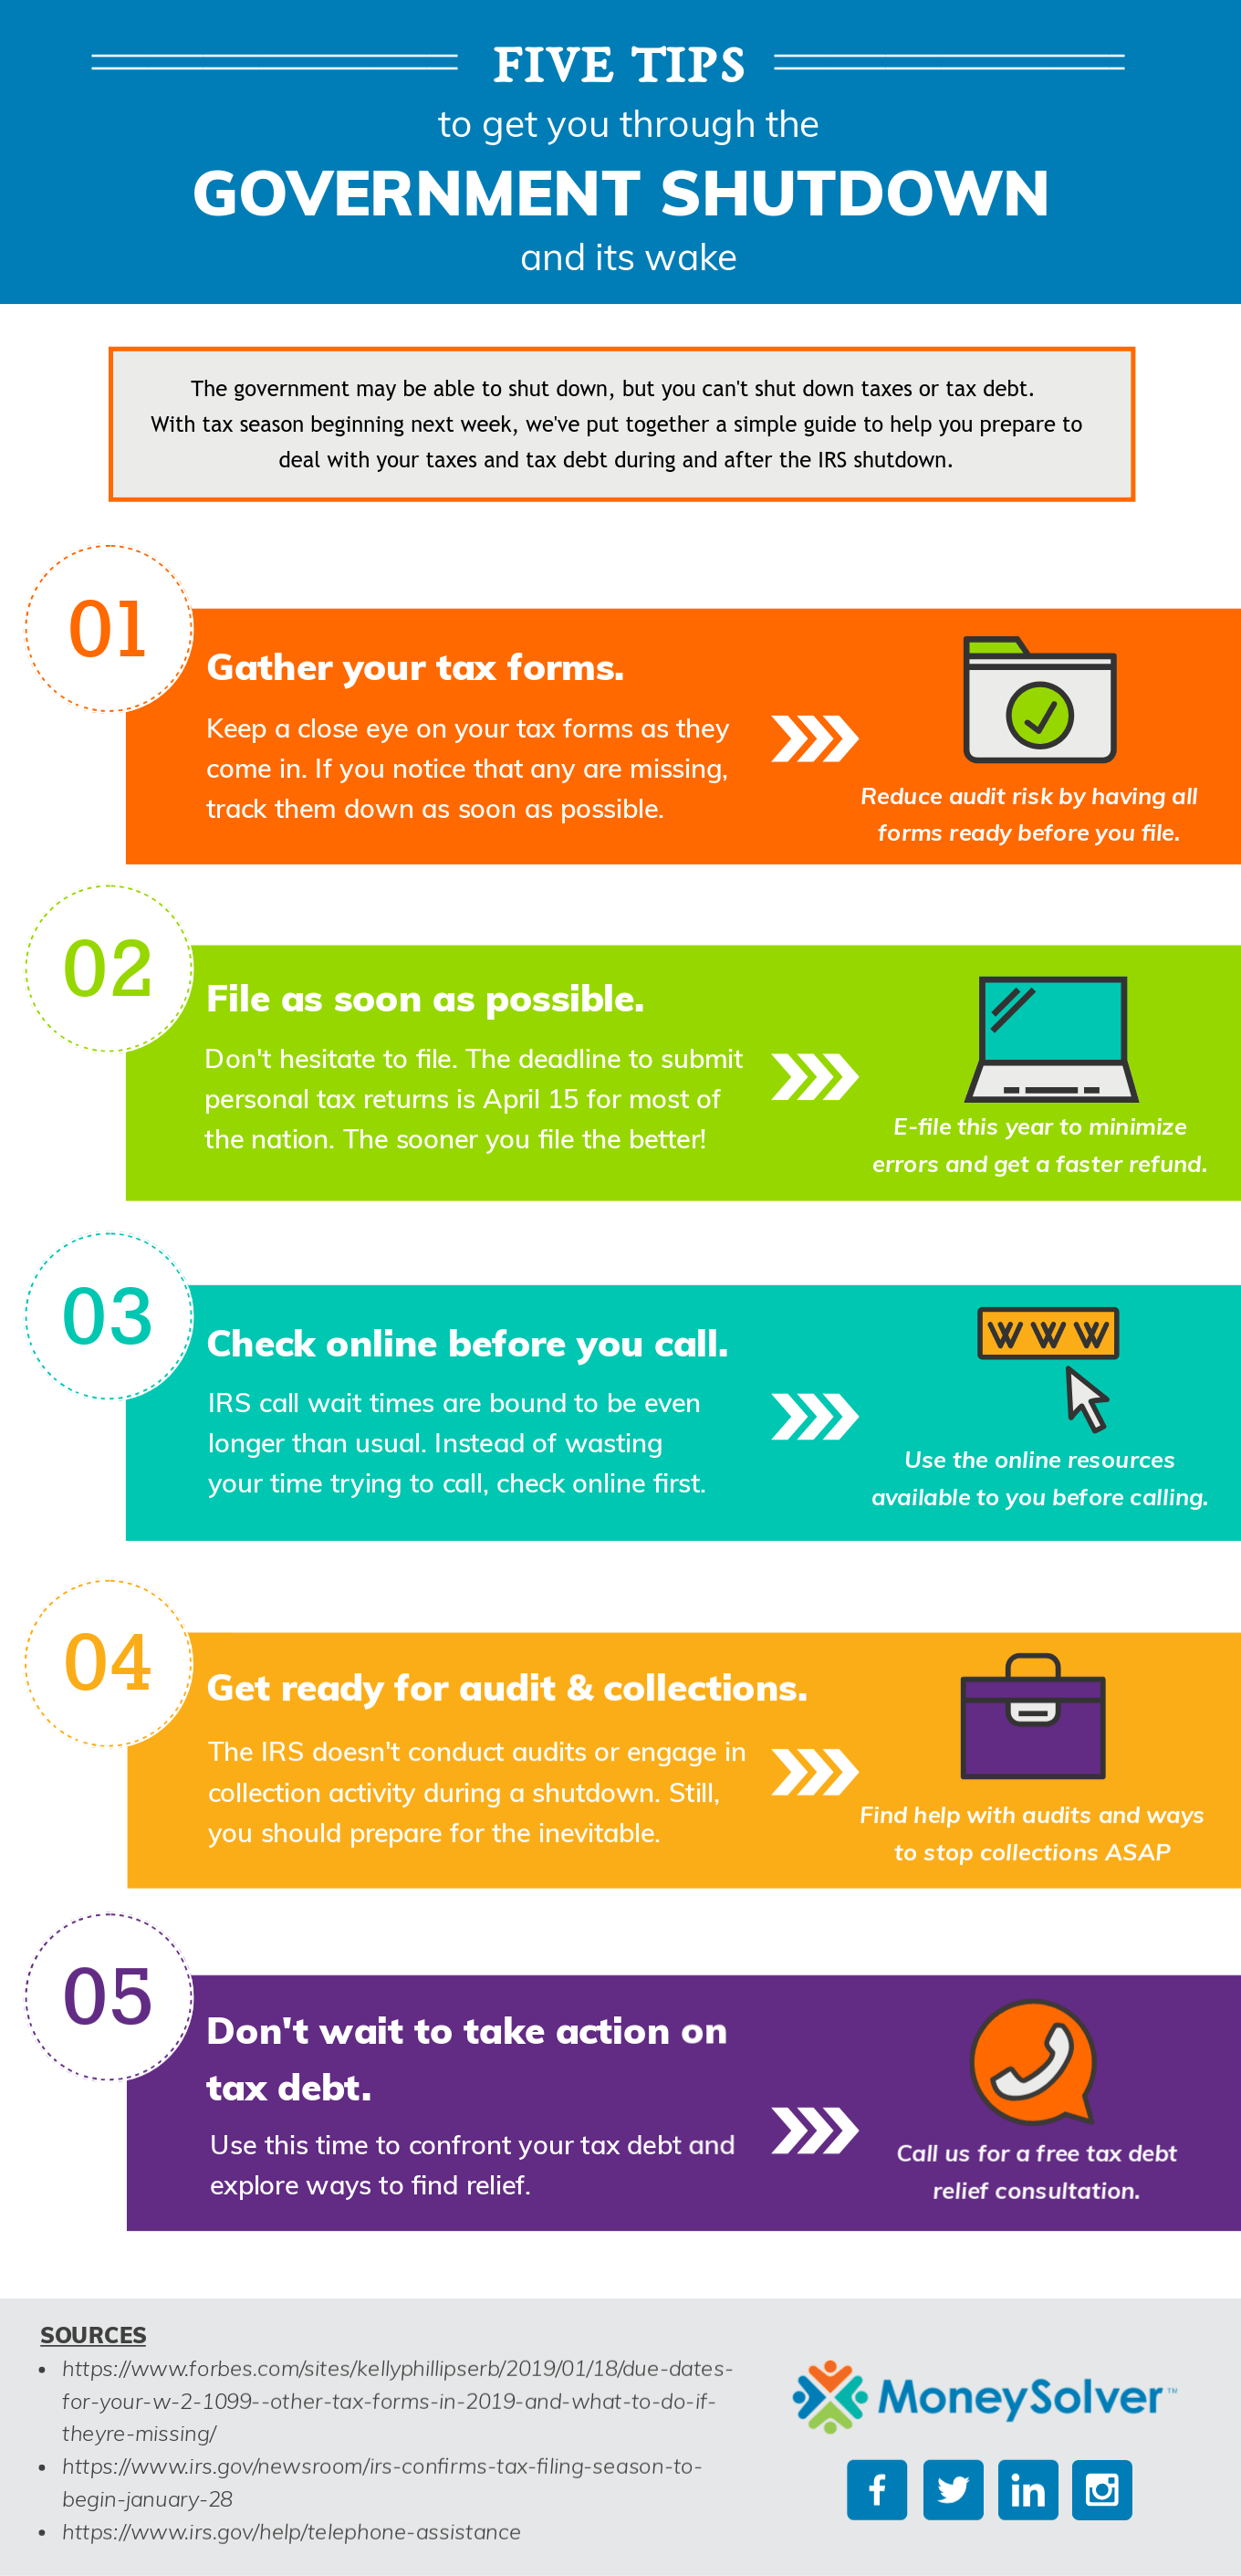 Infographic explaining five tips to get you through the IRS shutdown and its wake